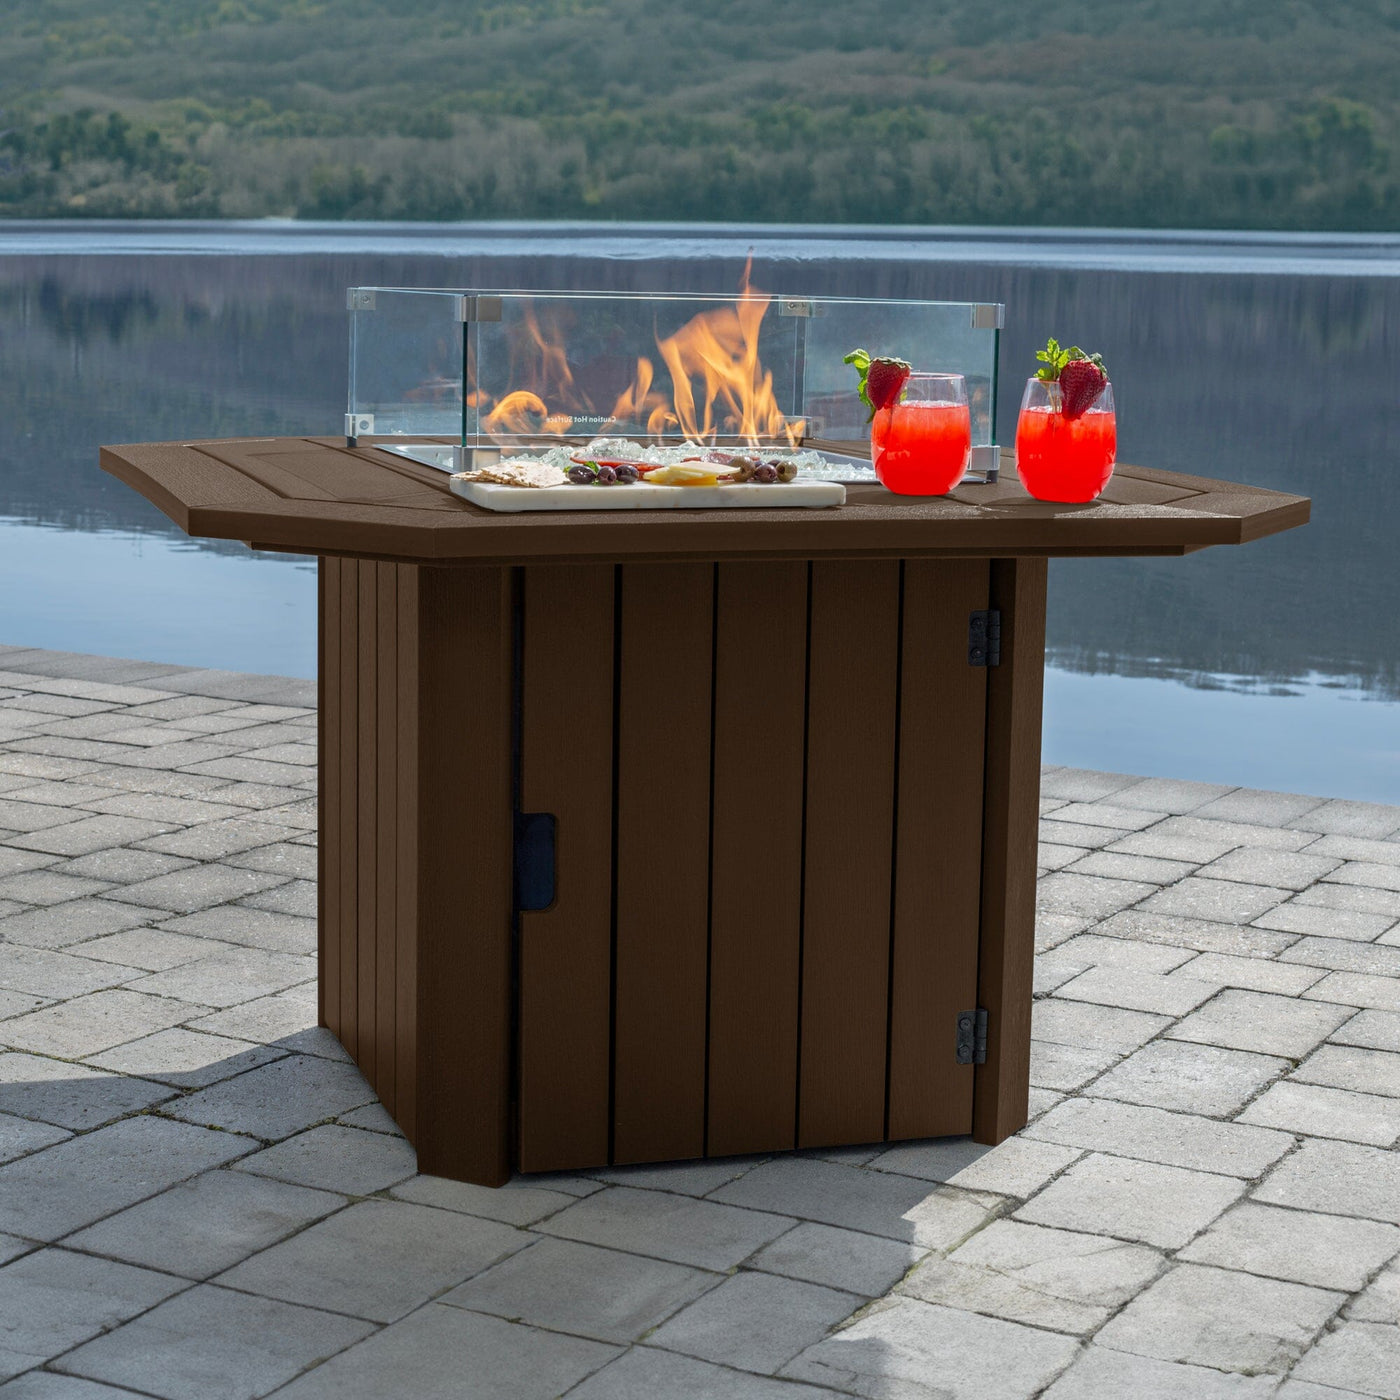 Brown Oasis Fire Table with lit flame and lake in background